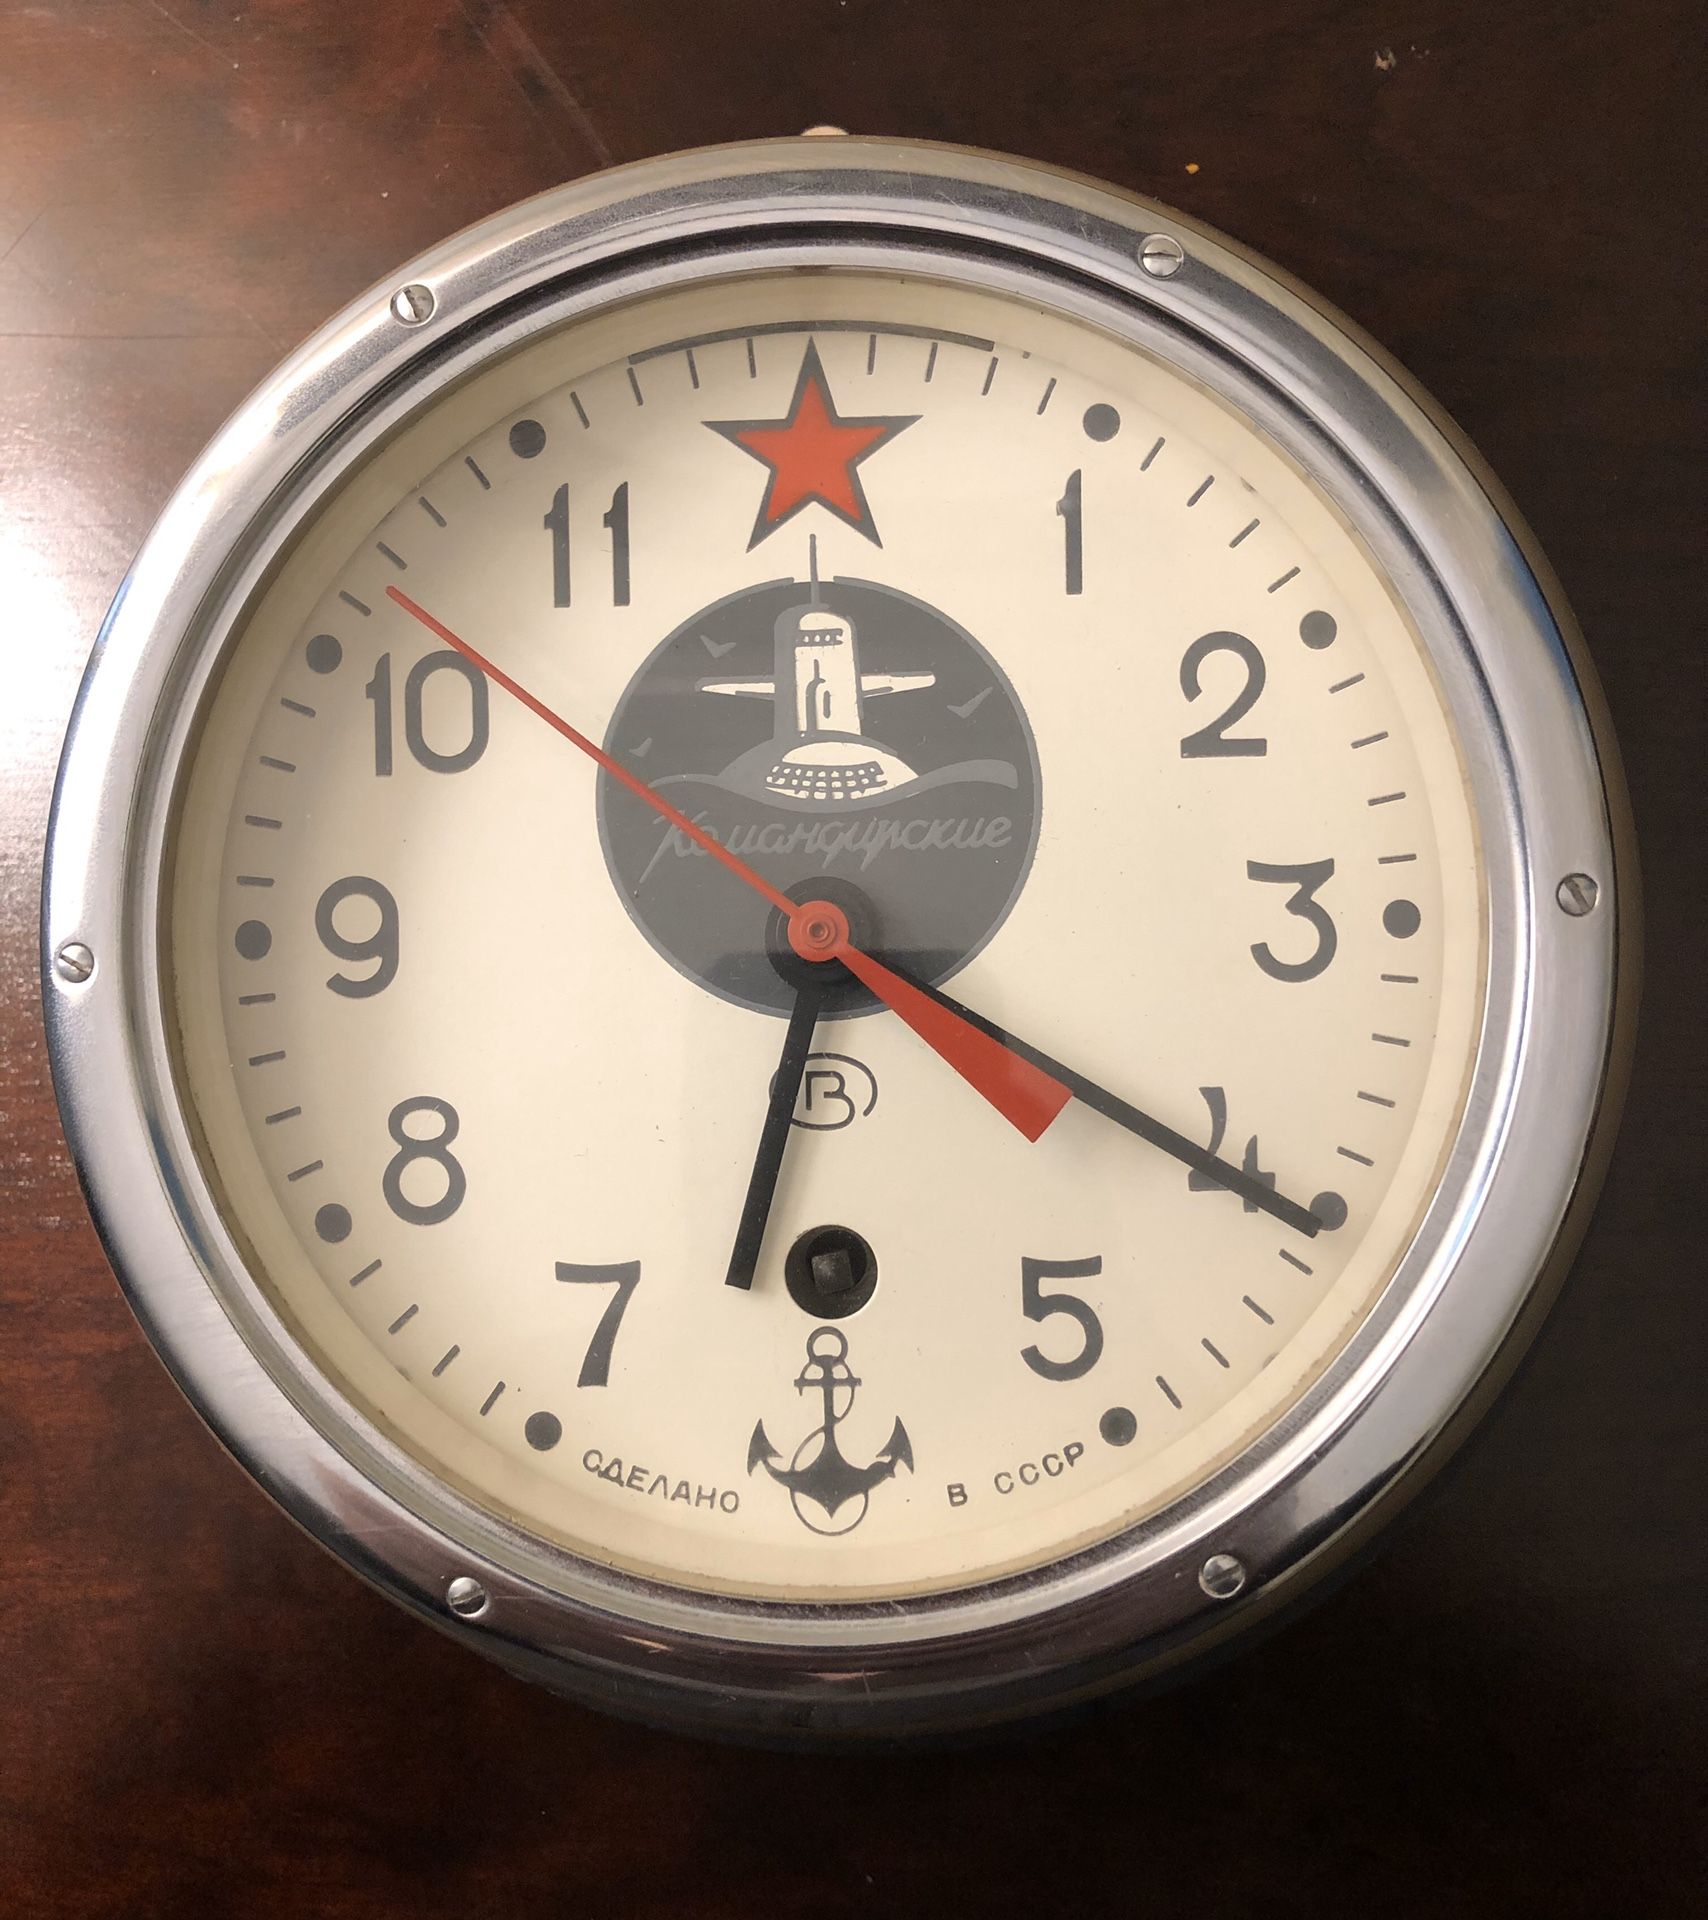 Antique collectible. Former USSR nuclear submarine clock. Mint condition.